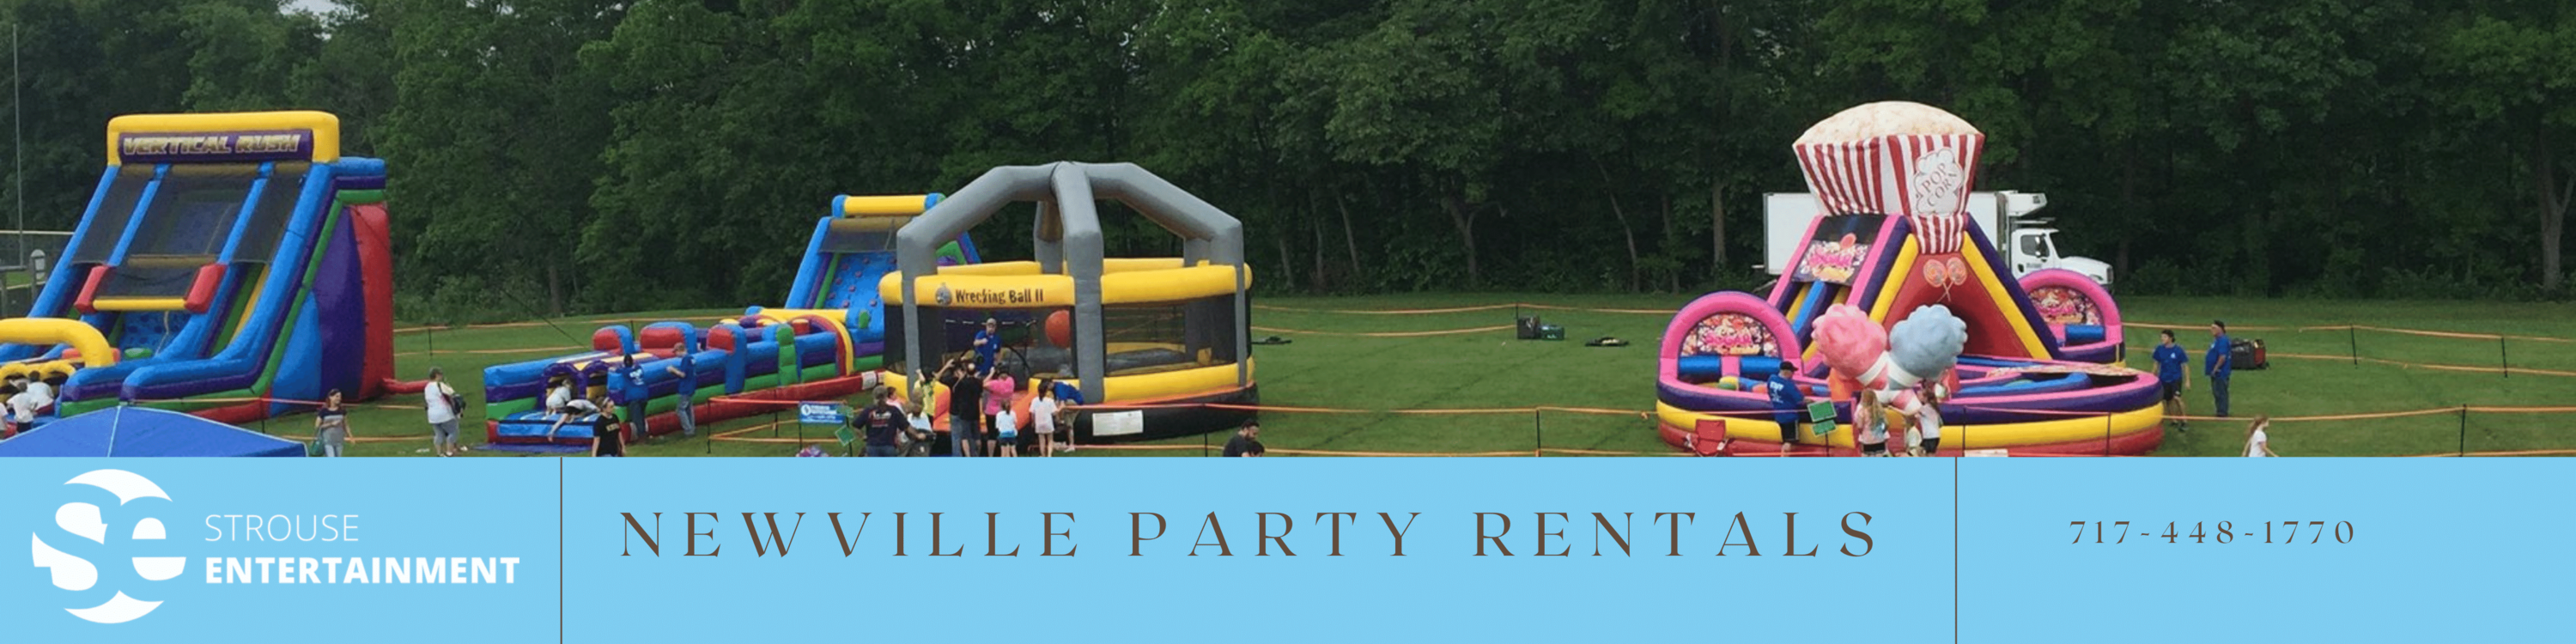 Newville Party Rentals